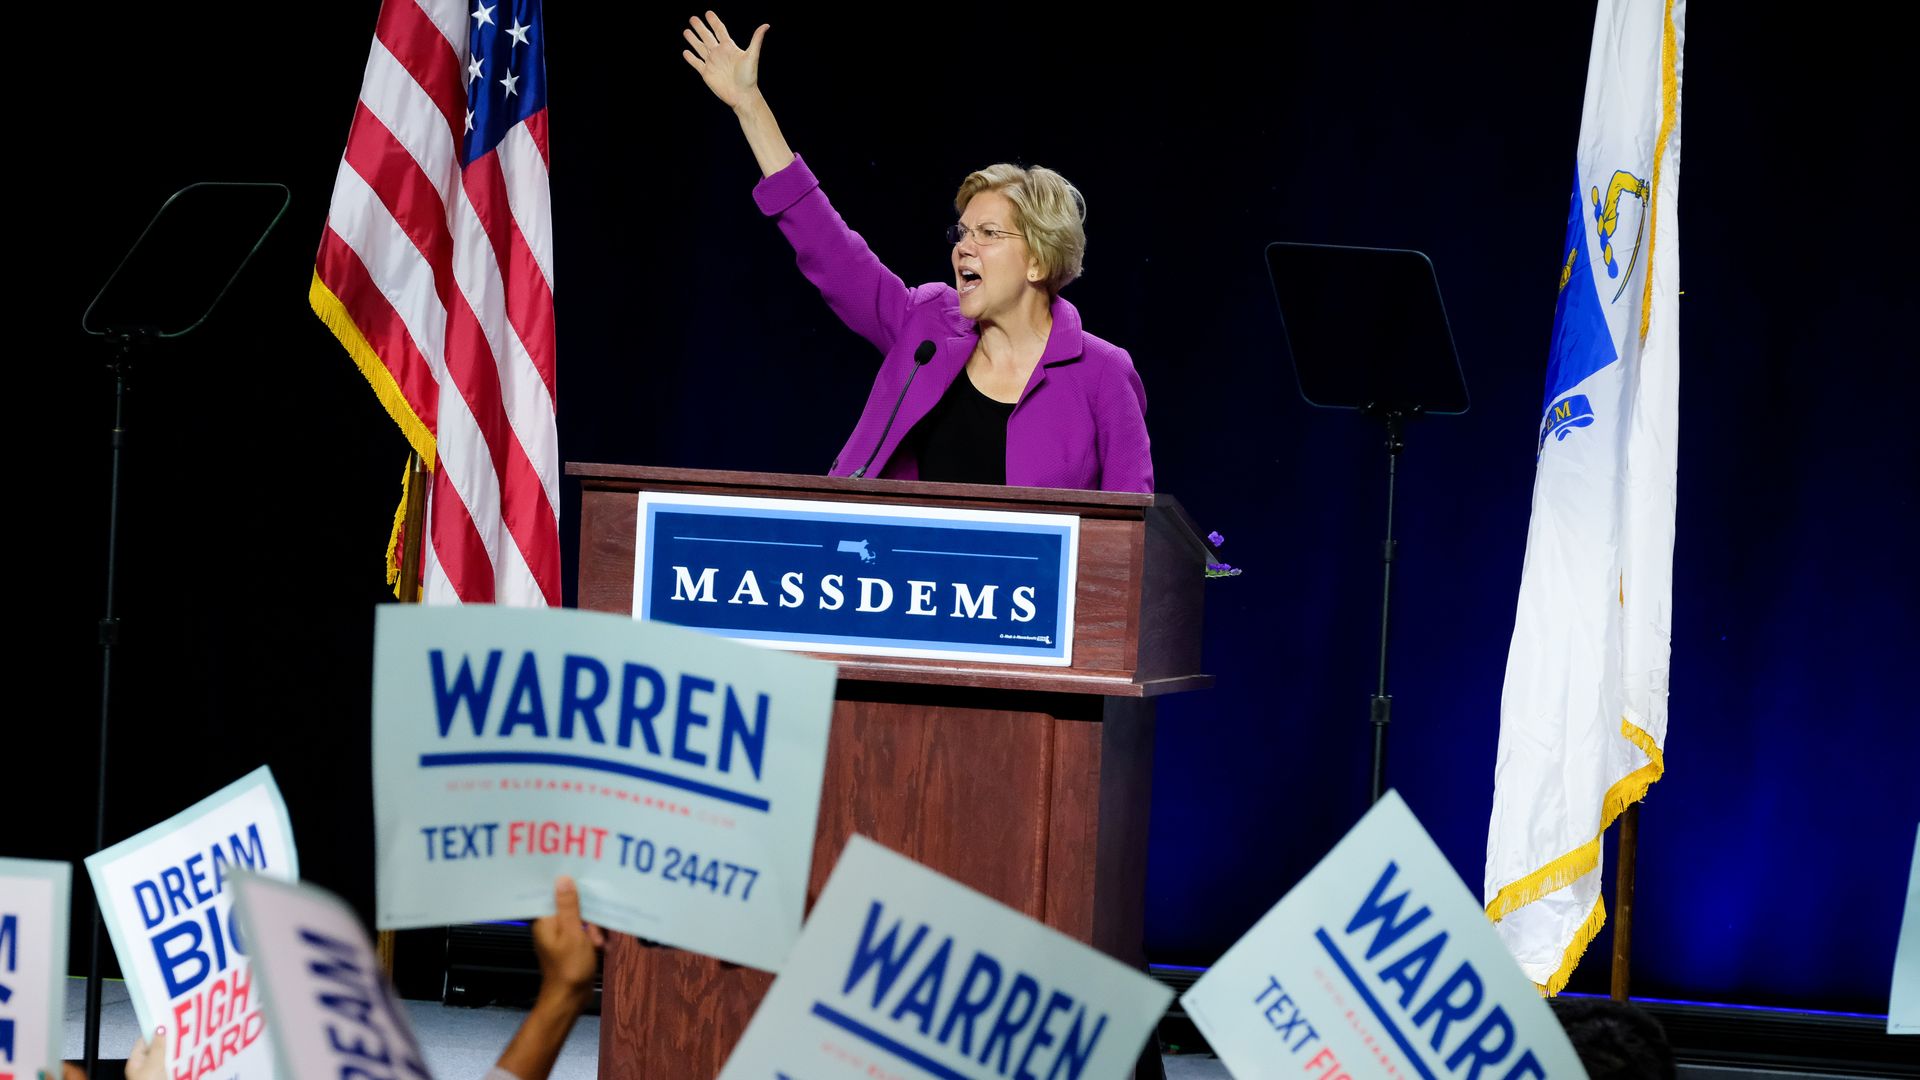 Presidential Candidate Elizabeth Warren speaks at a Democratic Party convention.